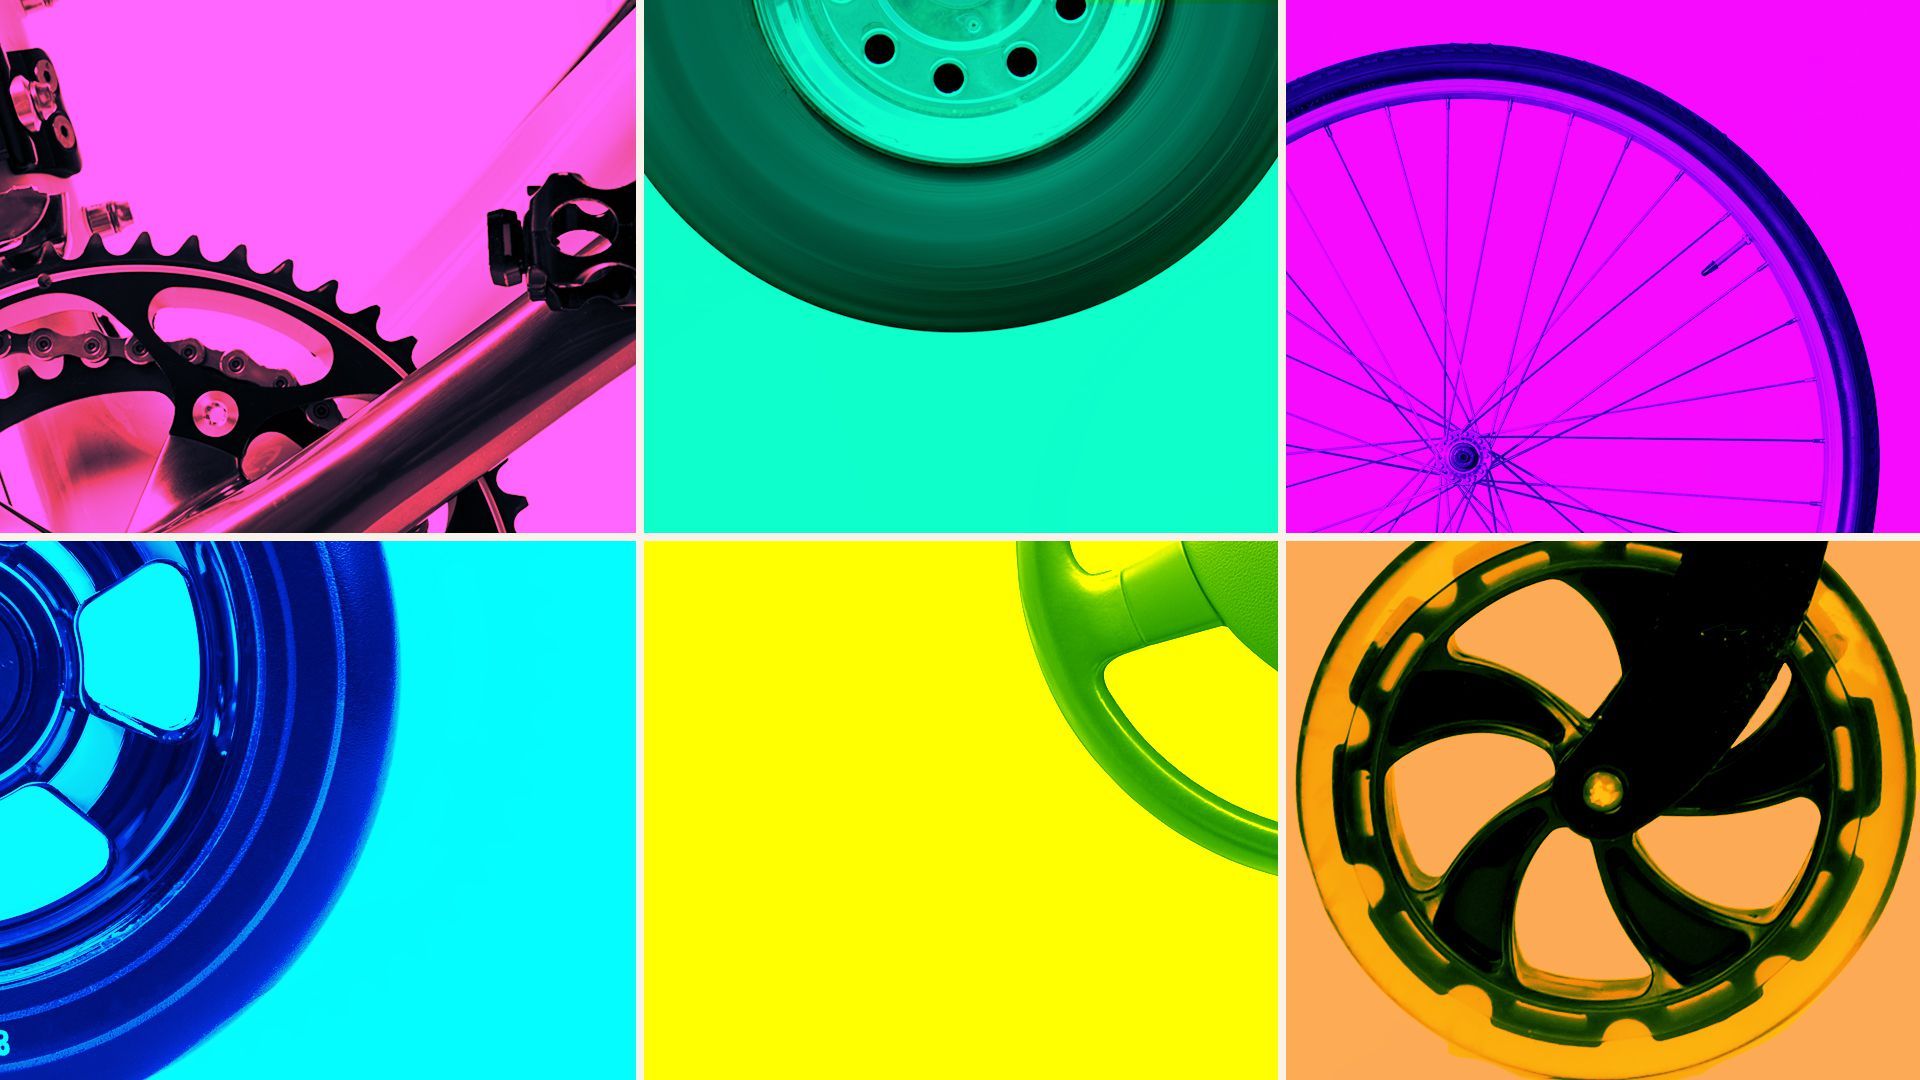 Illustration of various types of wheels on a grid pattern